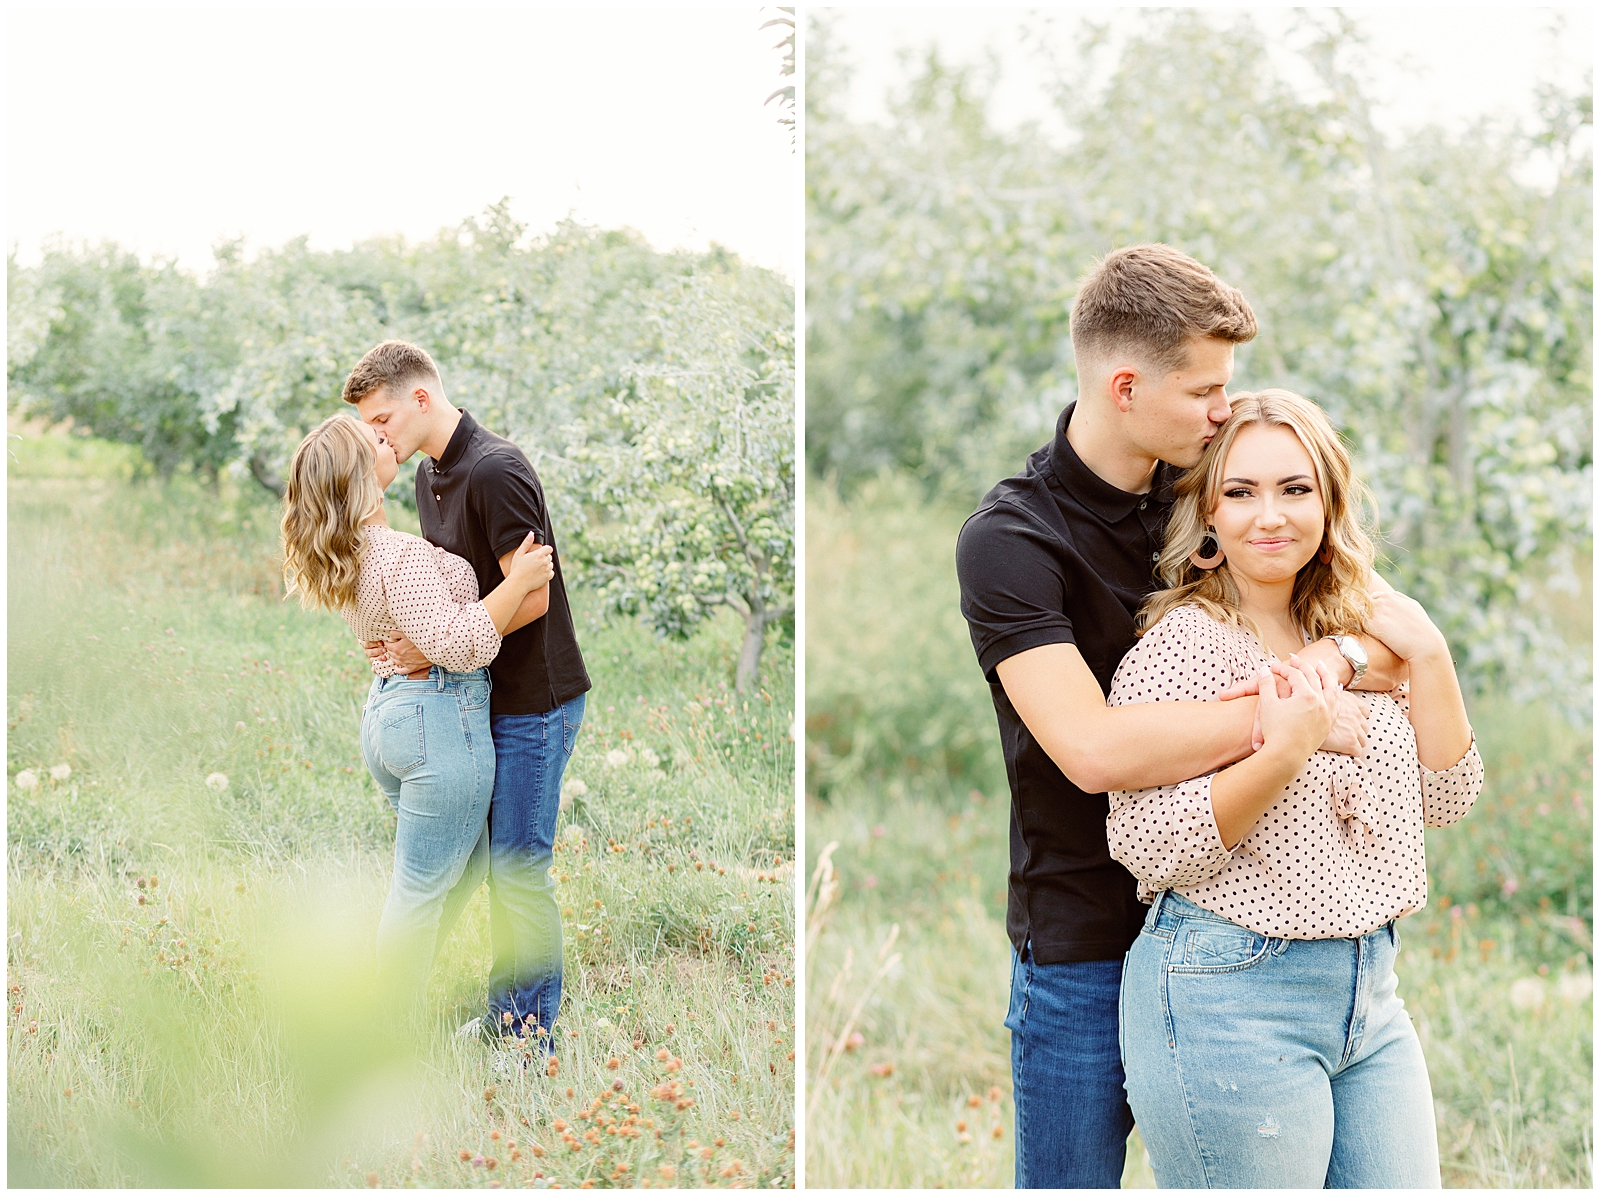 Romantic Summer Orchard Engagement Session in Boise Idaho